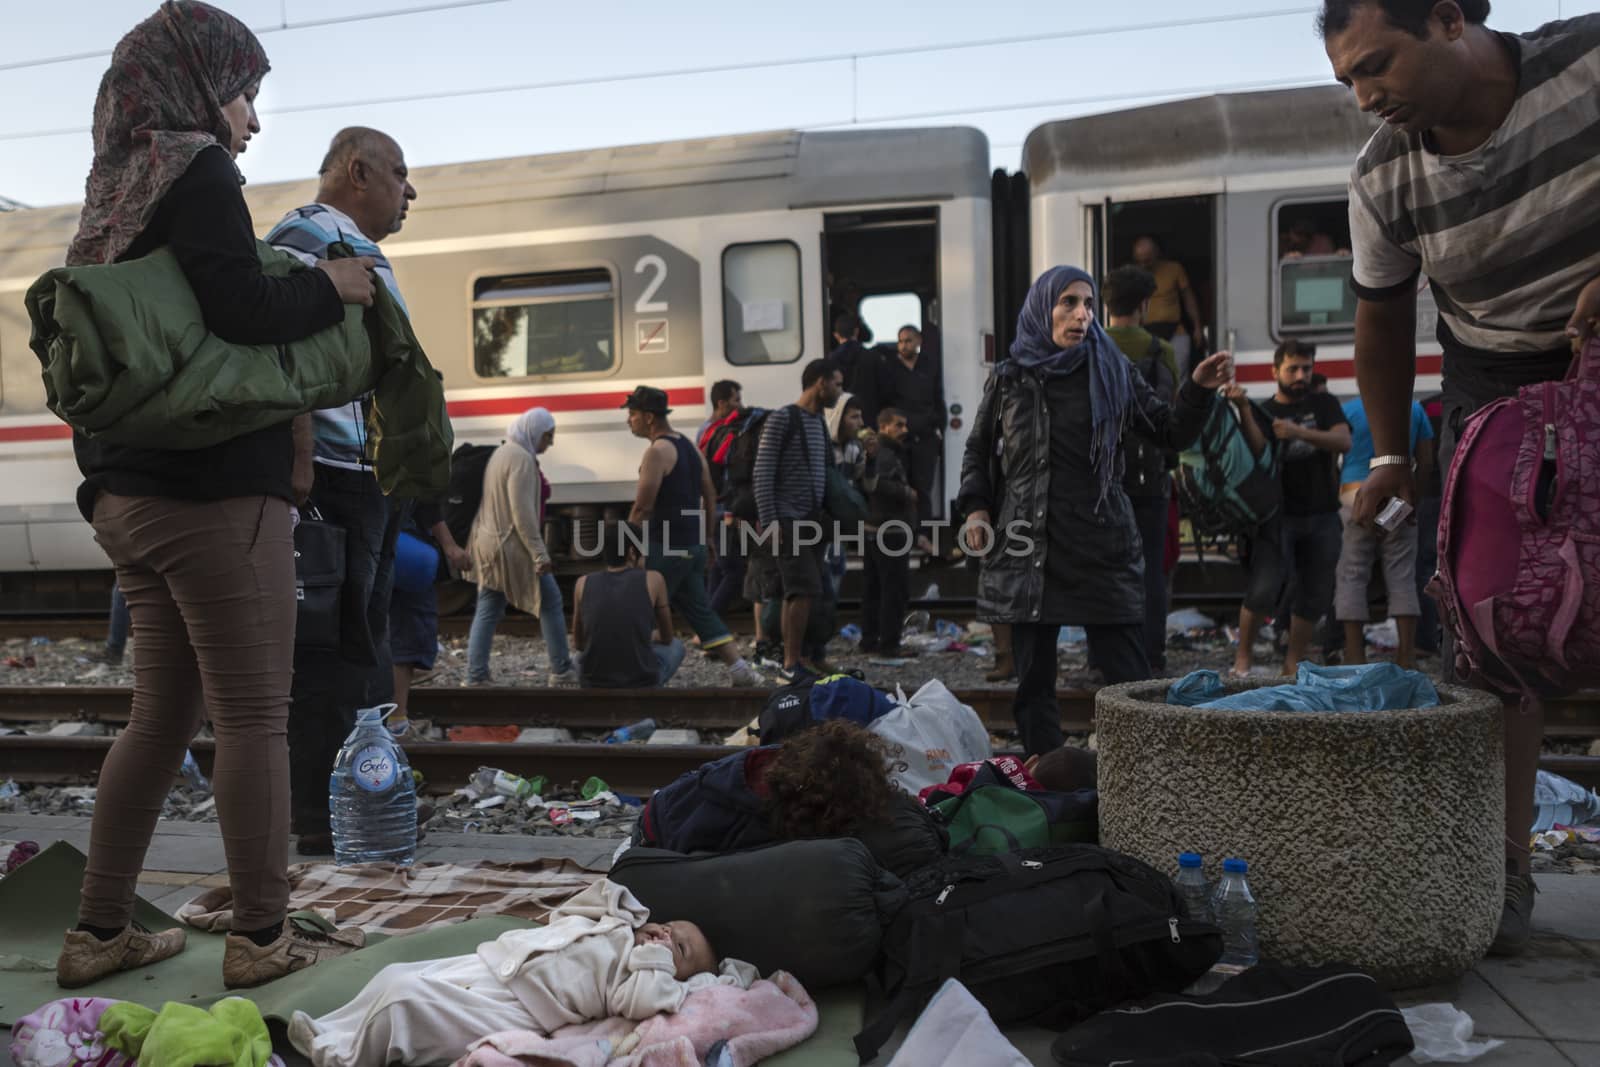 CROATIA, Tovarnik: Refugees gather at the railway station in Tovarnik, Croatia near the Serbian-border on September 18, 2015. Refugees are hoping to continue their journey to Germany and Northern Europe via Slovenia 